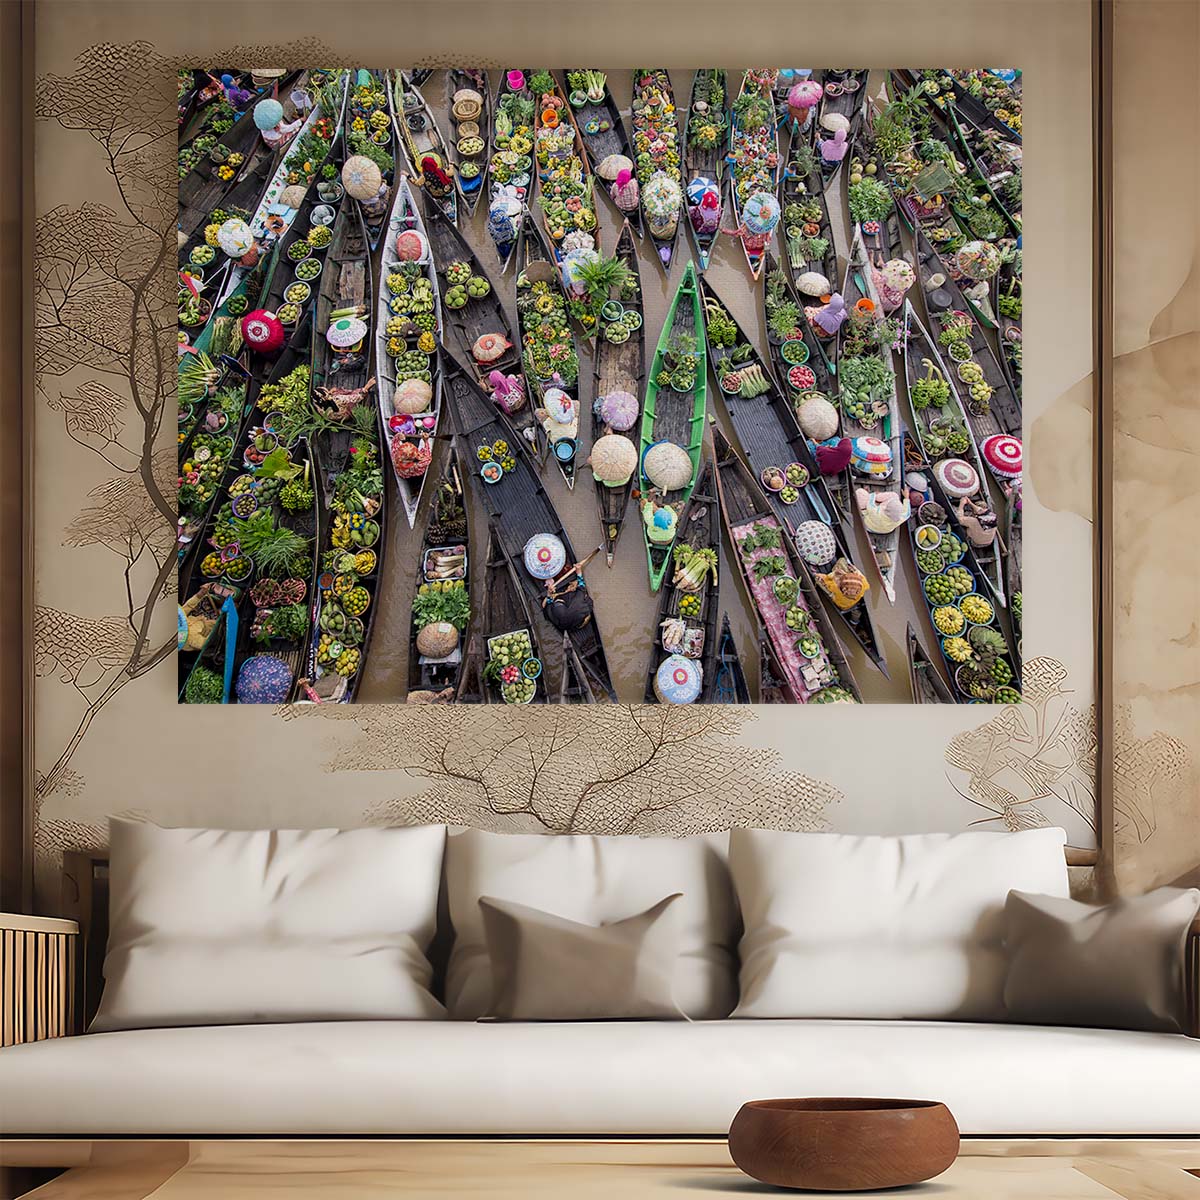 Vibrant Asian Floating Market Aerial View Wall Art by Luxuriance Designs. Made in USA.